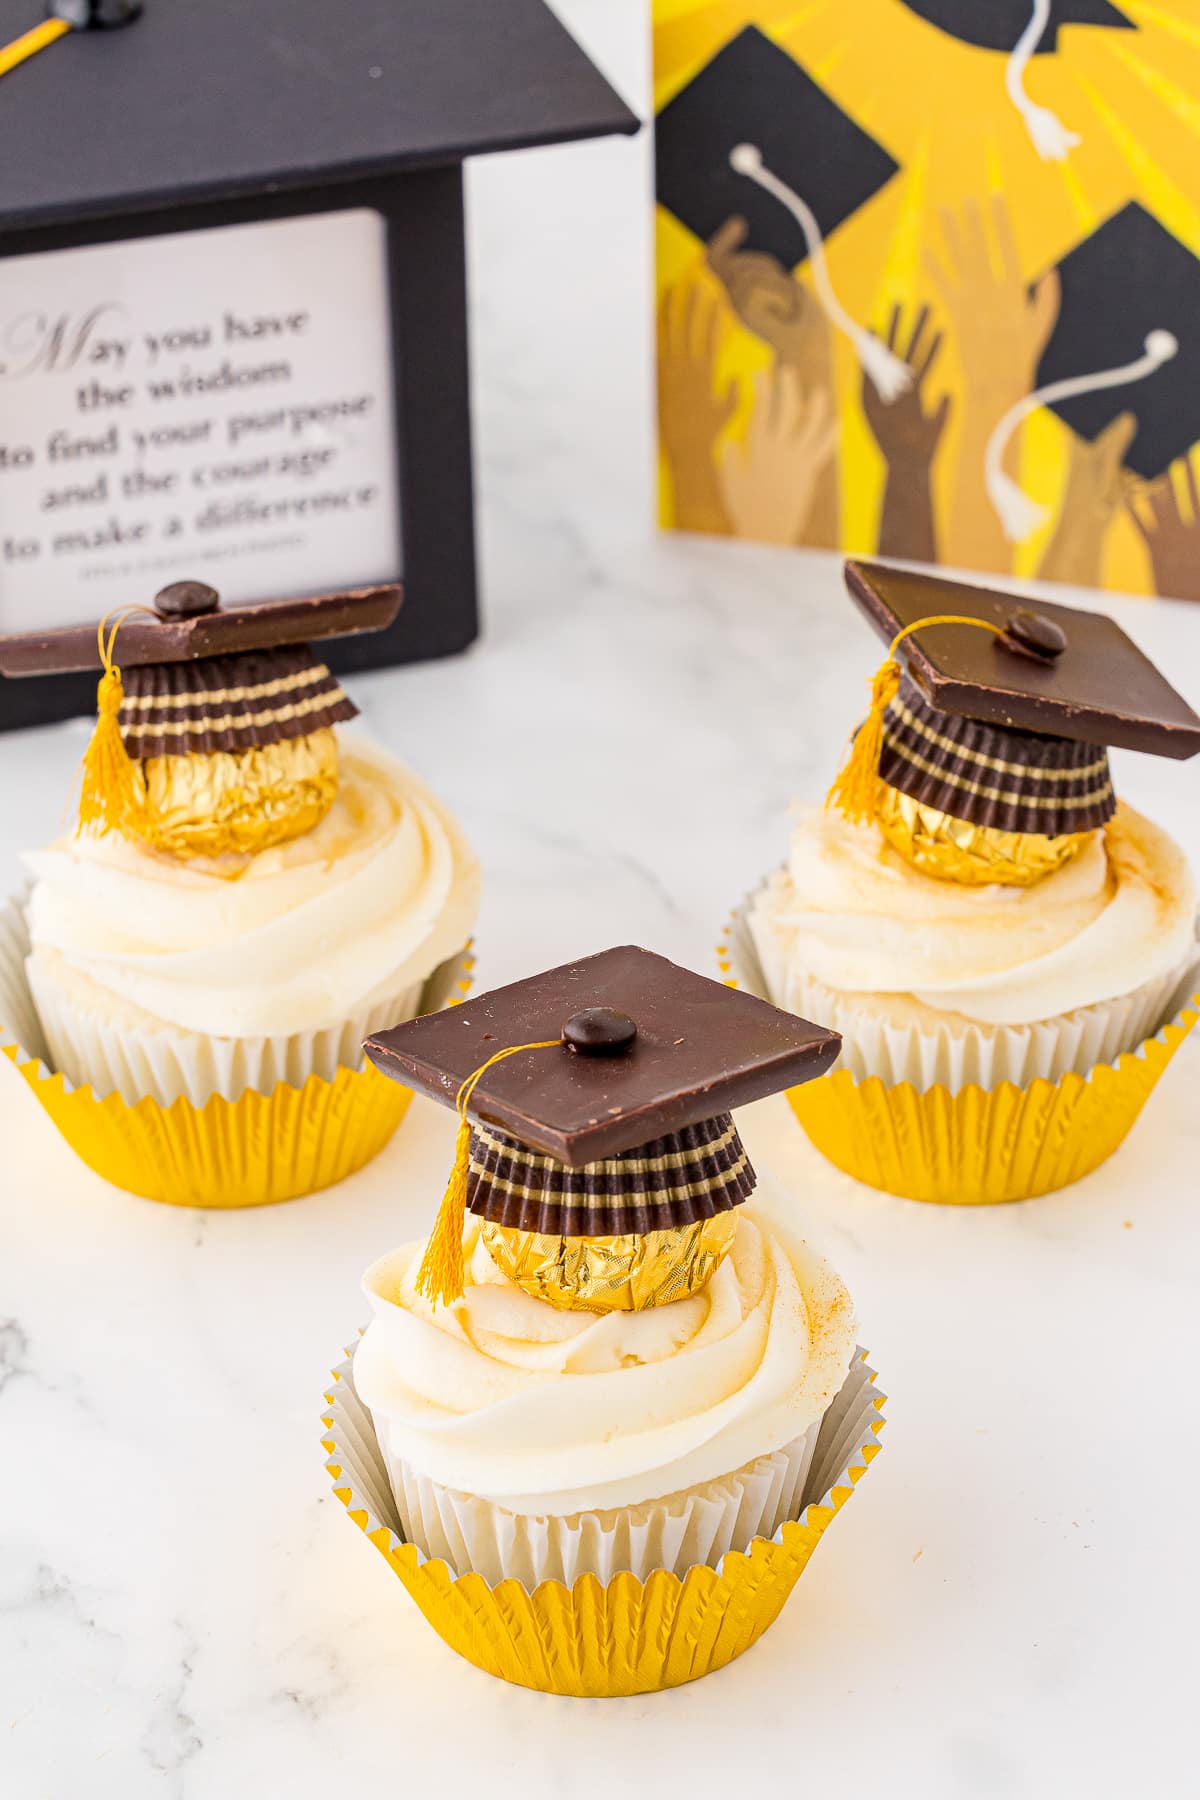 Graduation themed cupcakes with chocolate hats and gold foil wrappers with grad themed background